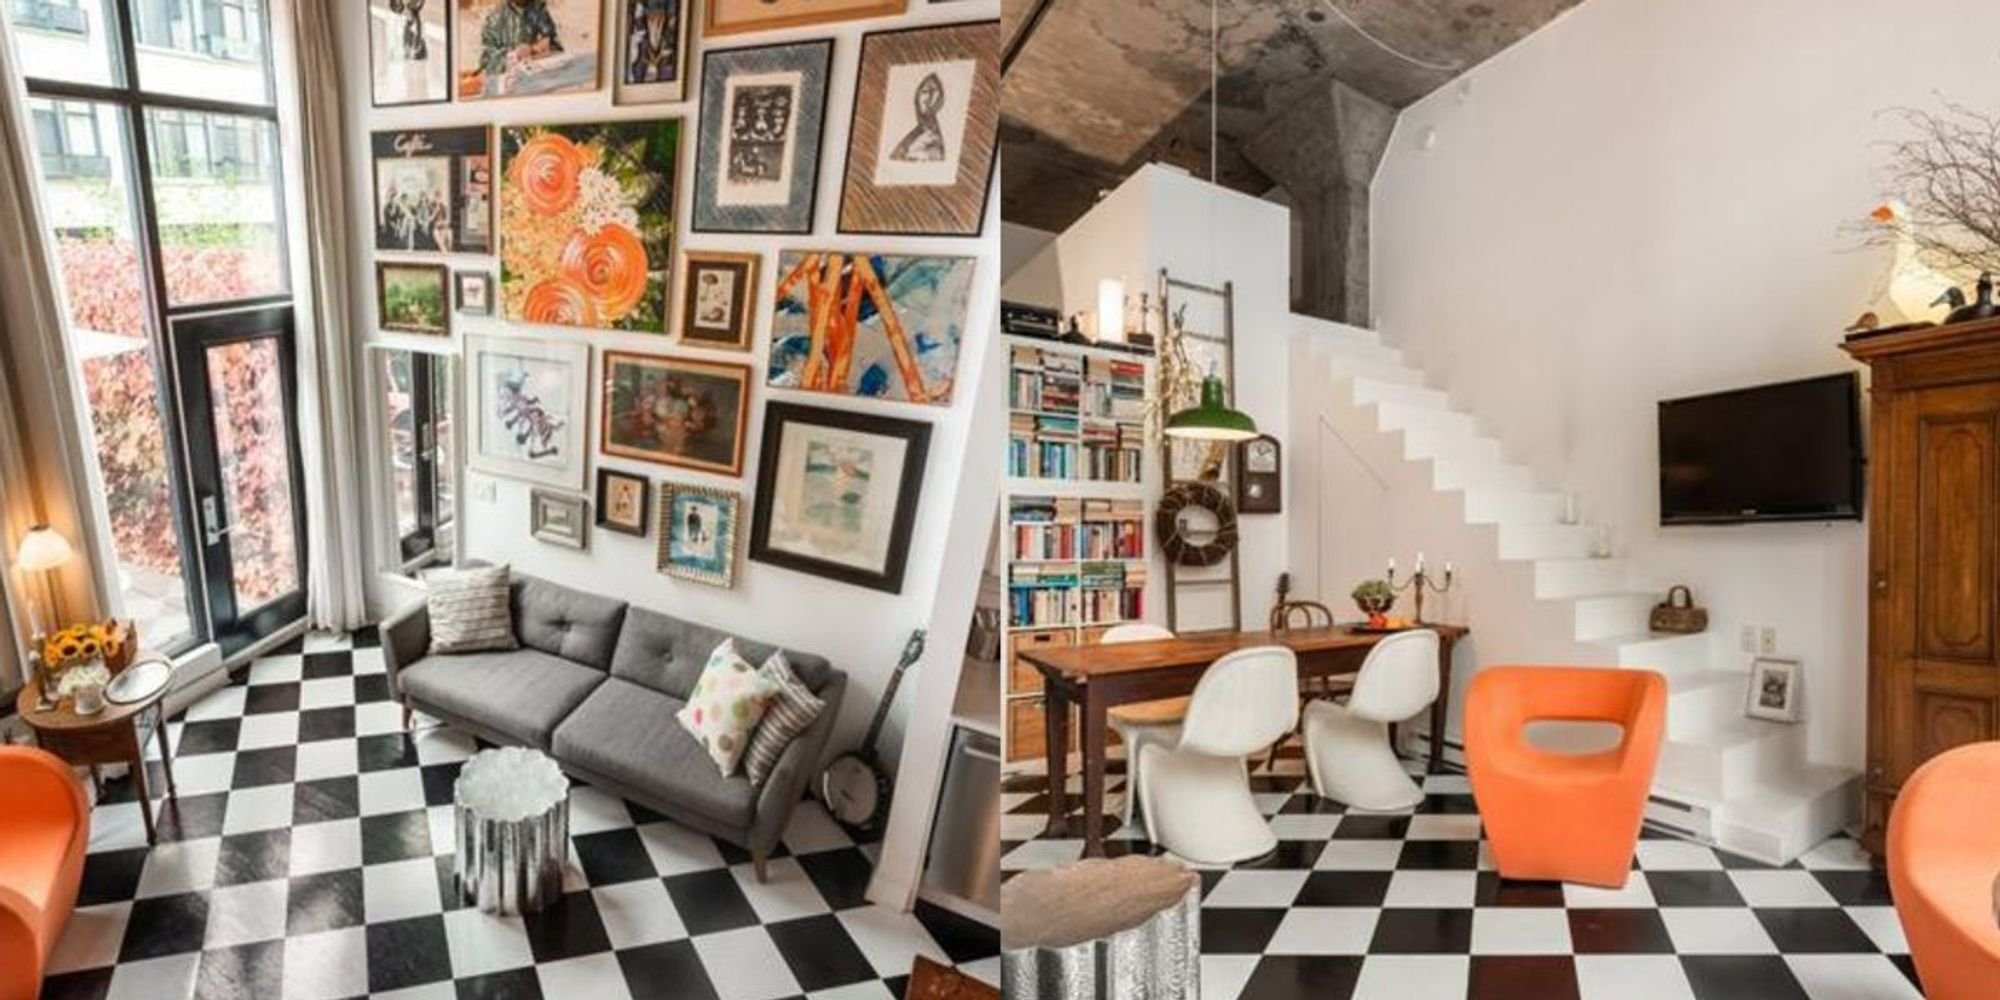 This Loft For Sale In MTL Is Like Tripping Down A Chic 'Alice In Wonderland' Rabbit Hole